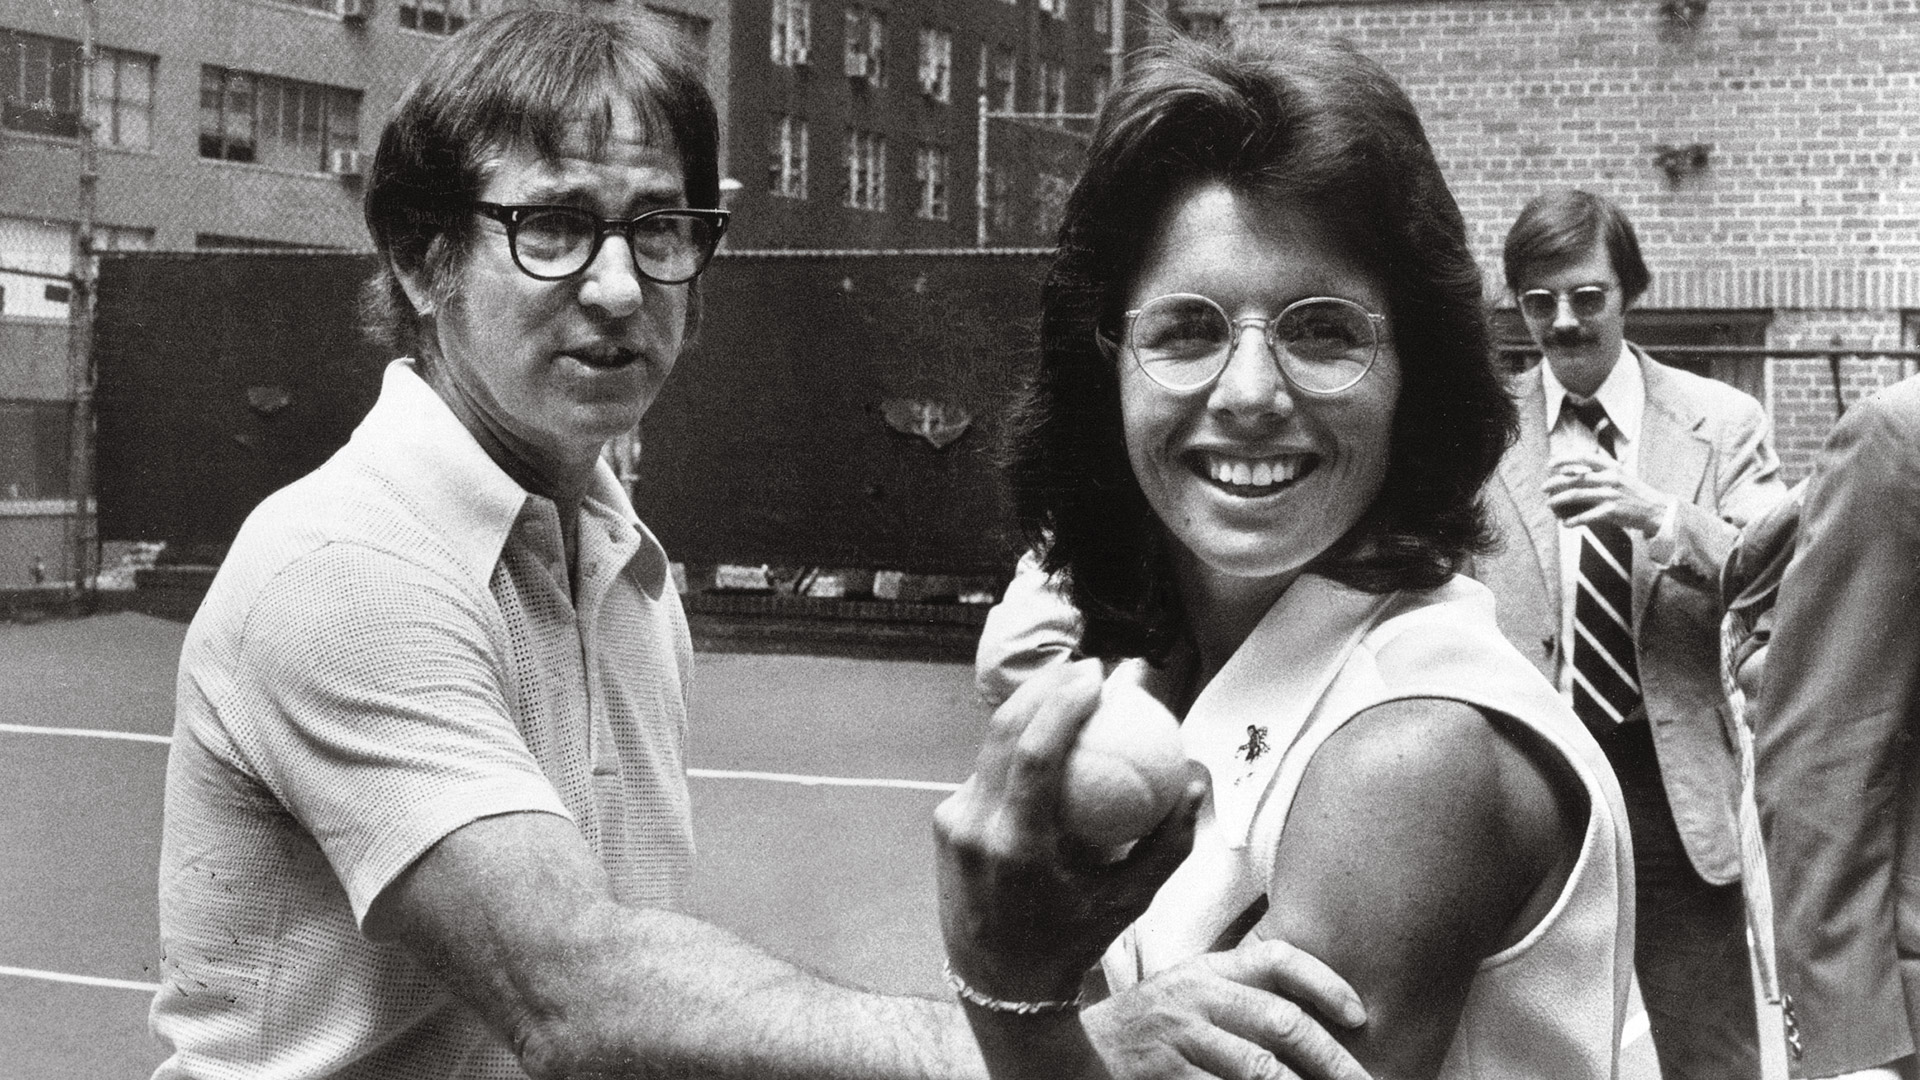 Remembering the Battle of the Sexes - Sports Illustrated